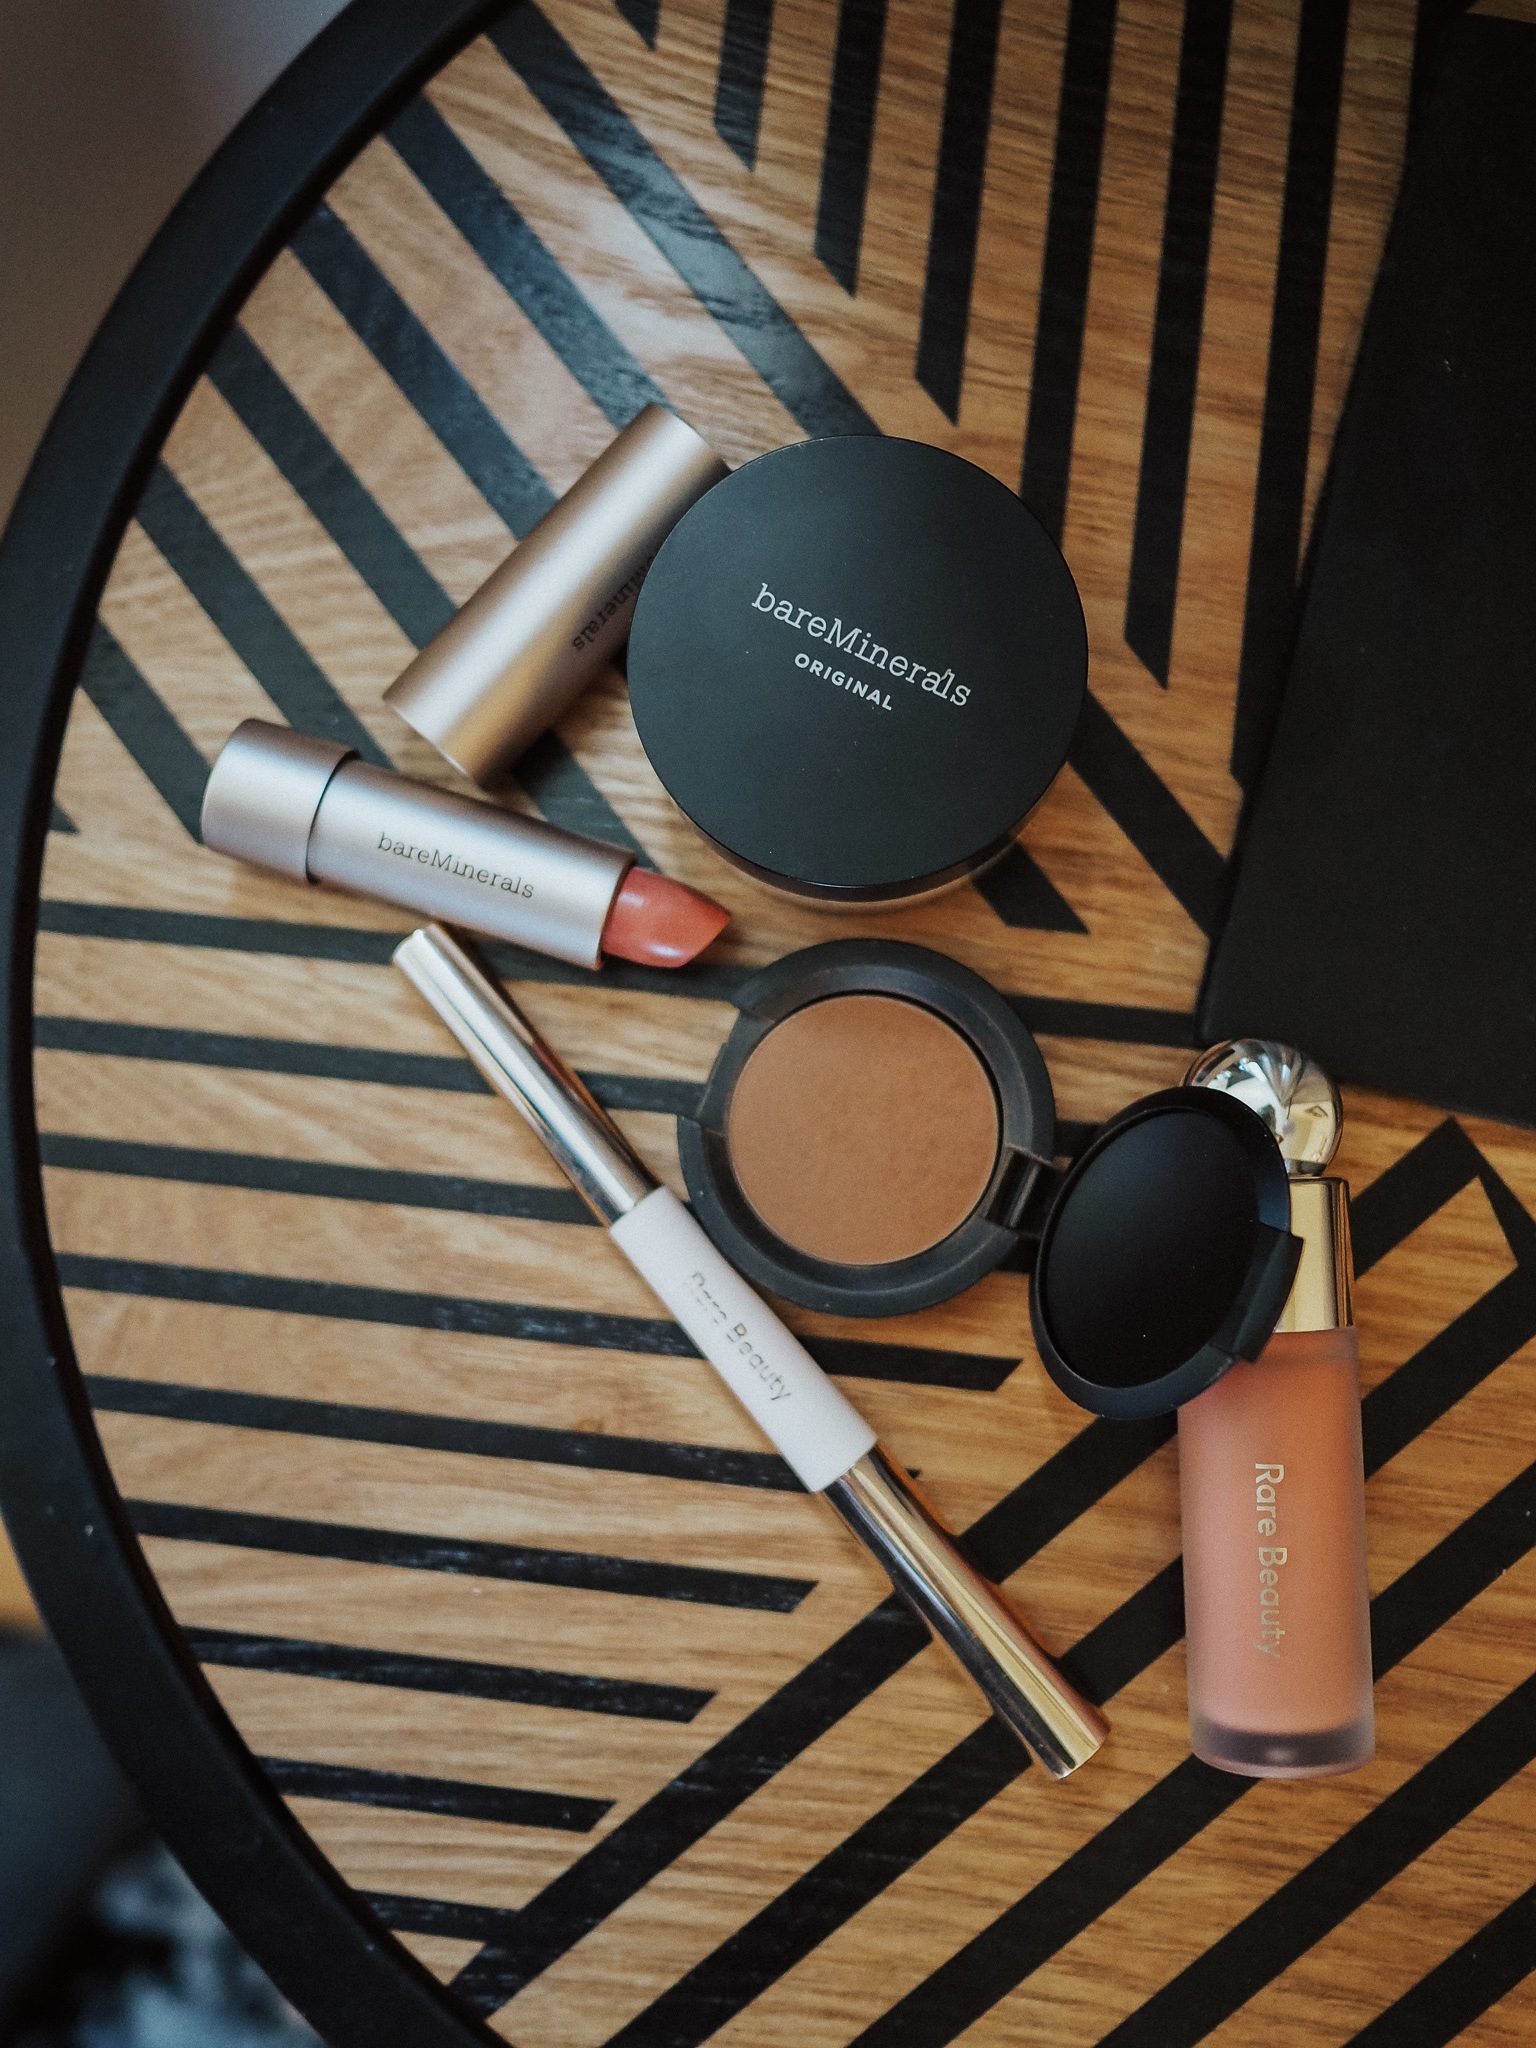 Find out all the details, dates, promo codes, and top picks from the VIB Sephora Sale in 2020 - all in this handy blog post!